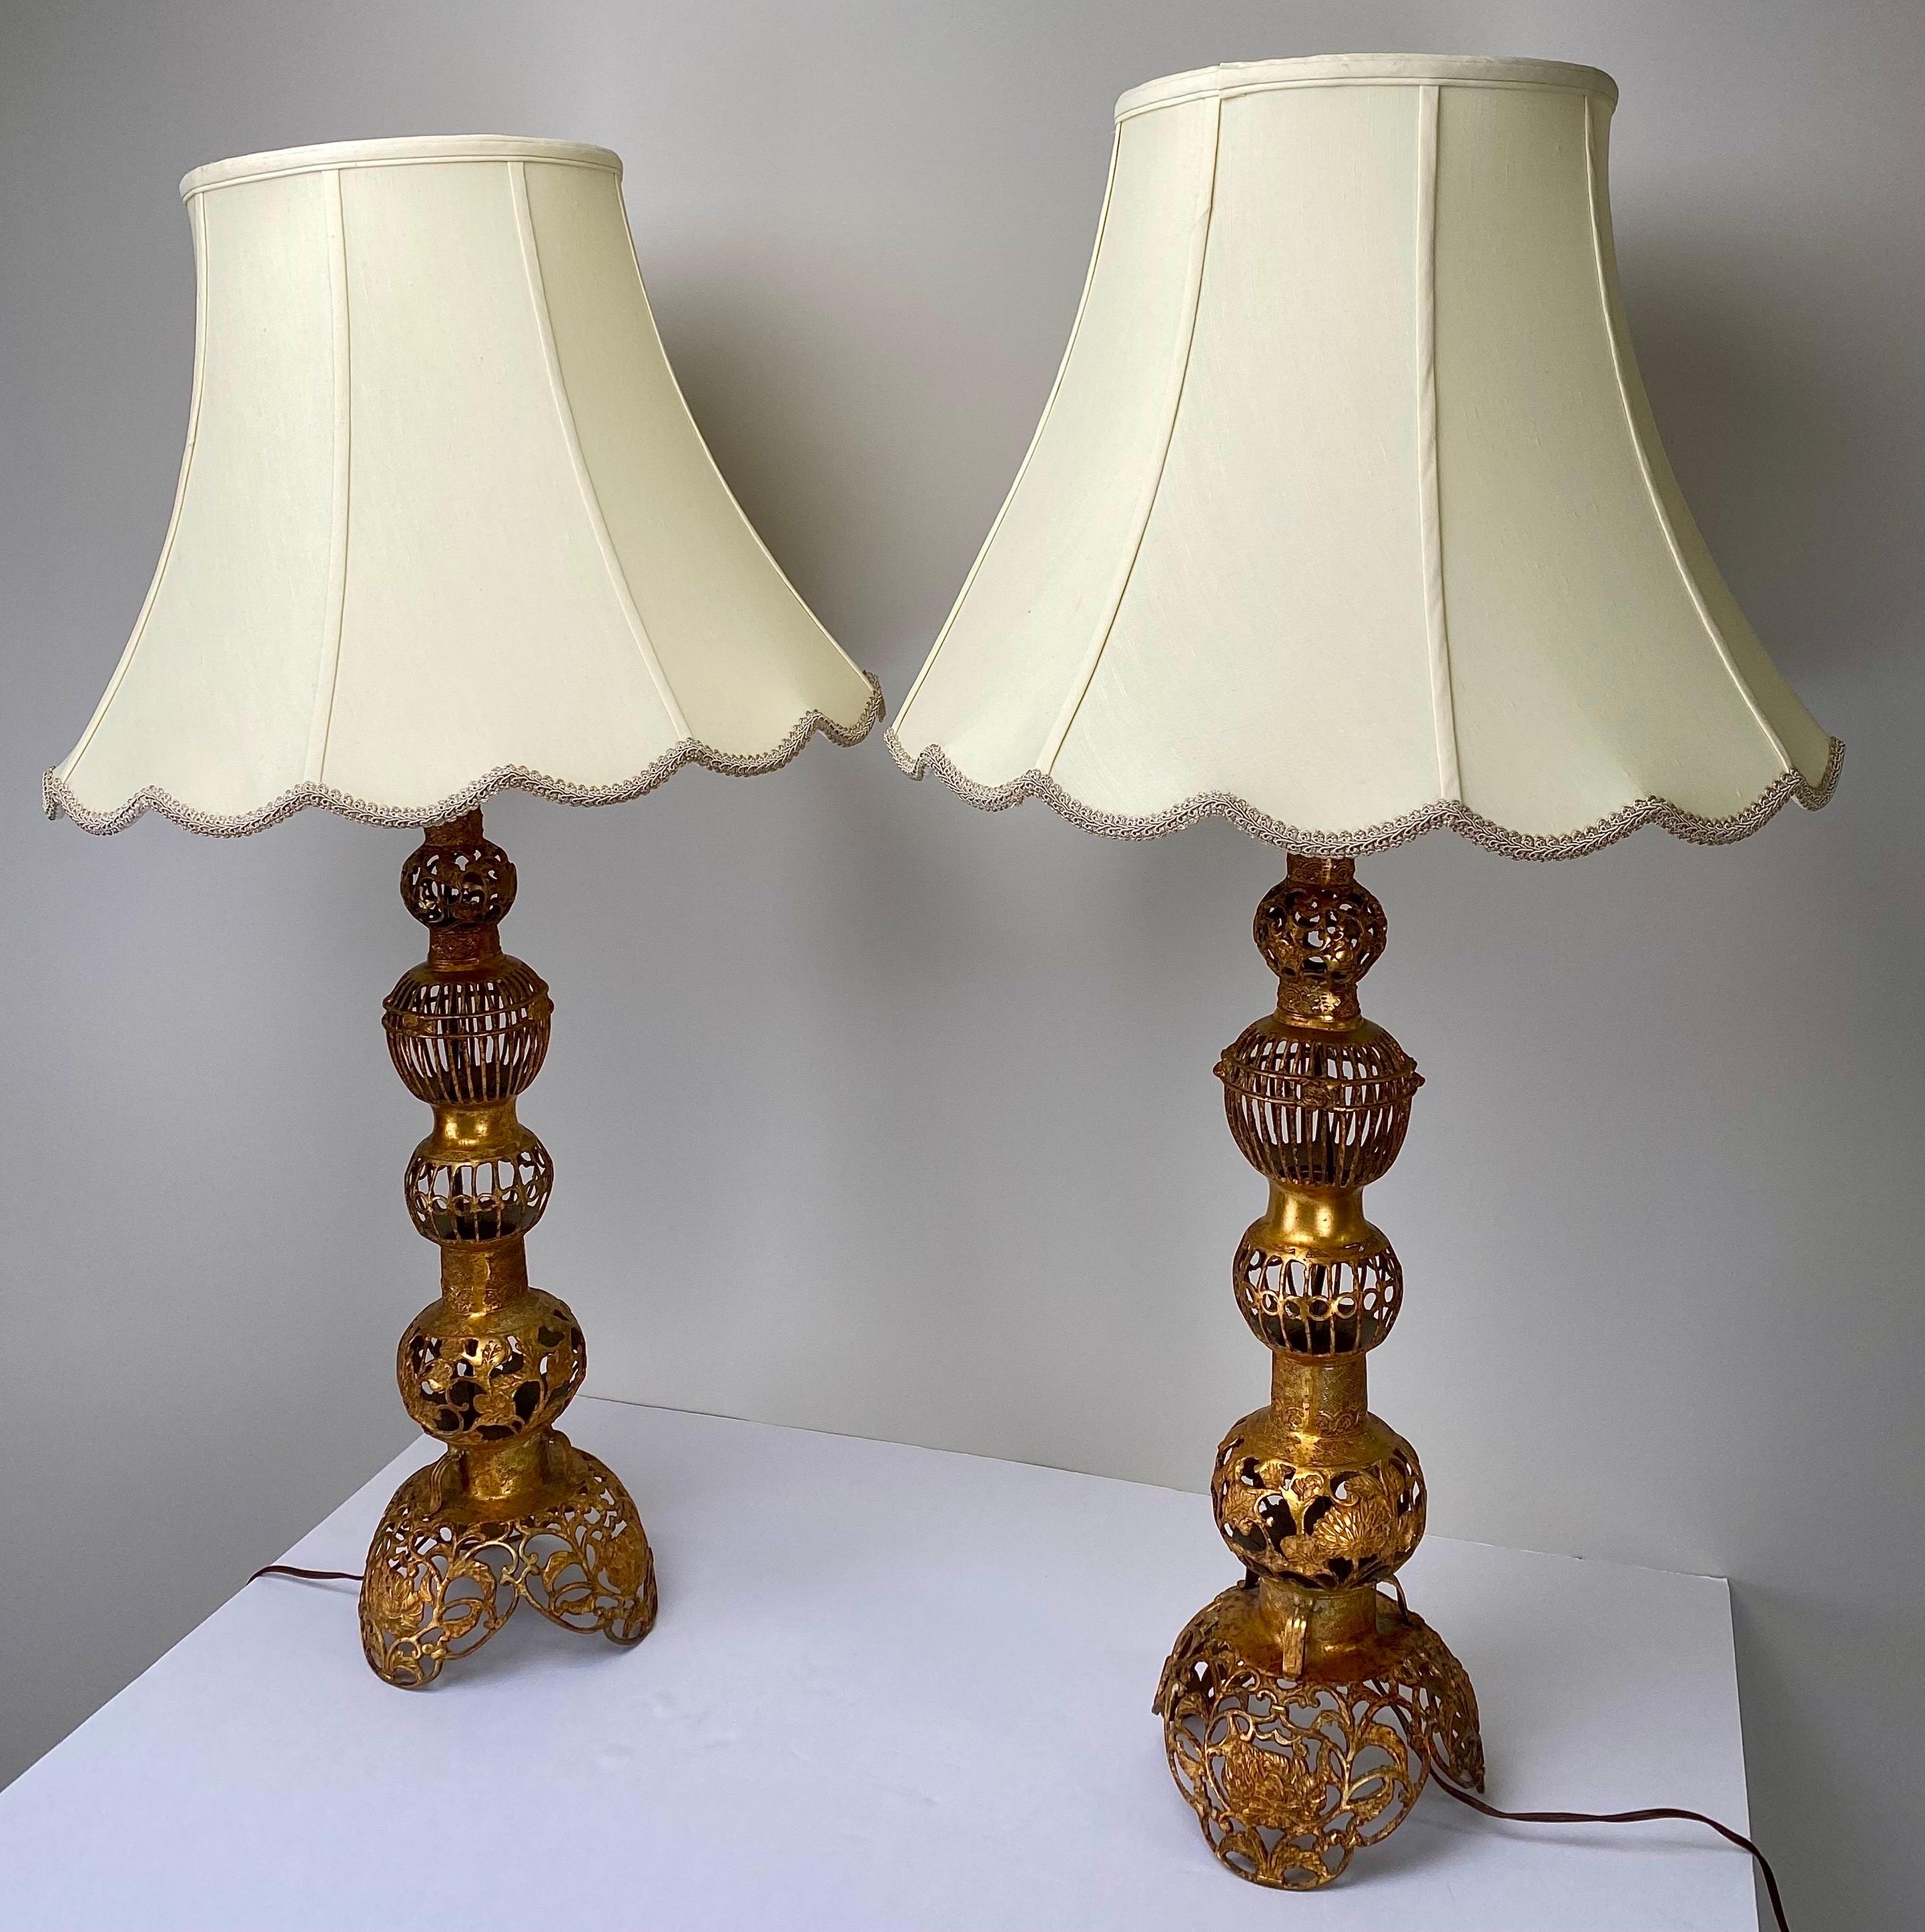 A striking pair of Hollywood Regency Chinese-style table lamps, exuding opulence and grace. Crafted with meticulous artistry, these tiered lamps stand as majestic pieces, fashioned from bronze and bathed in a luxurious copper hue. The intricate